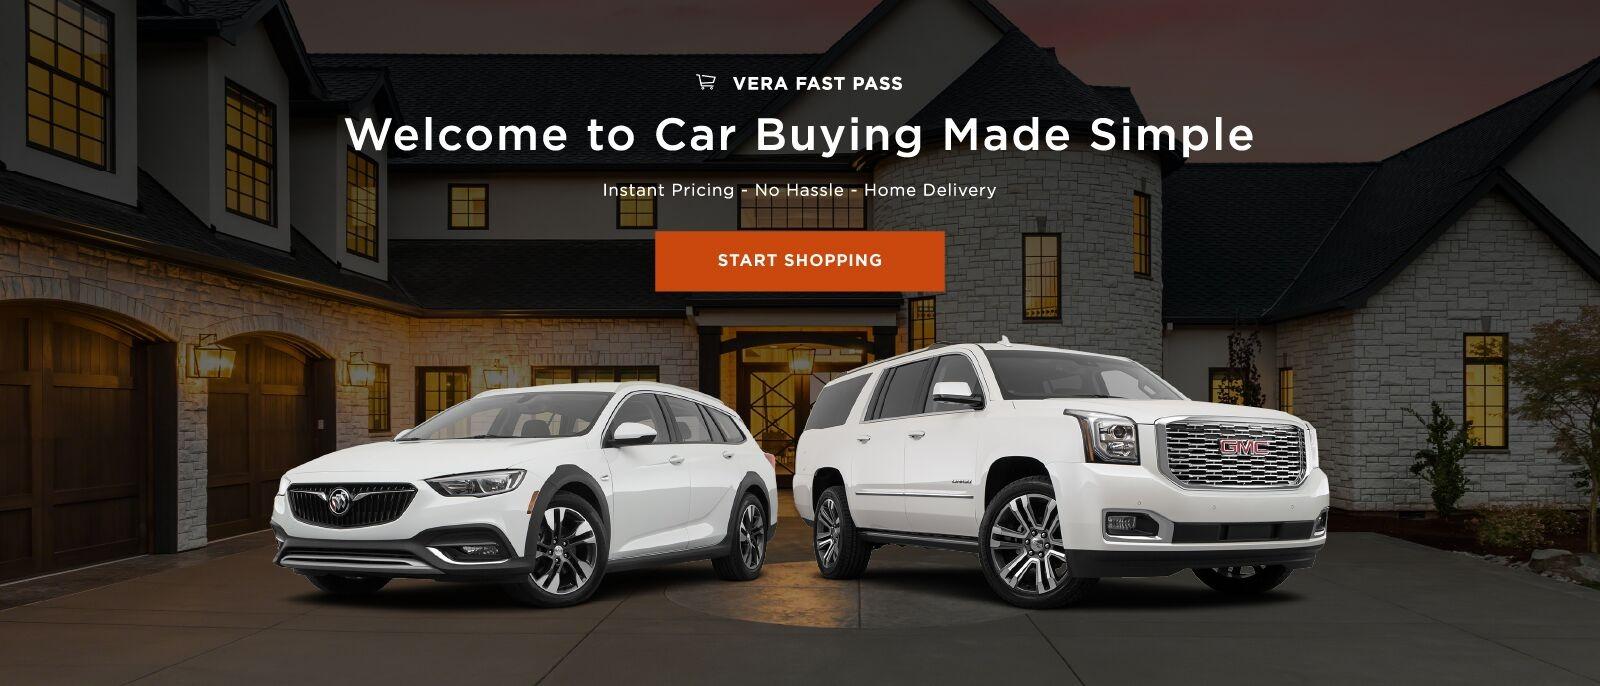 Vera Fast Pass 
Welcome to Car Buying Made Simple 
Instant Pricing No Hassle Home Delivery 
Start Shopping